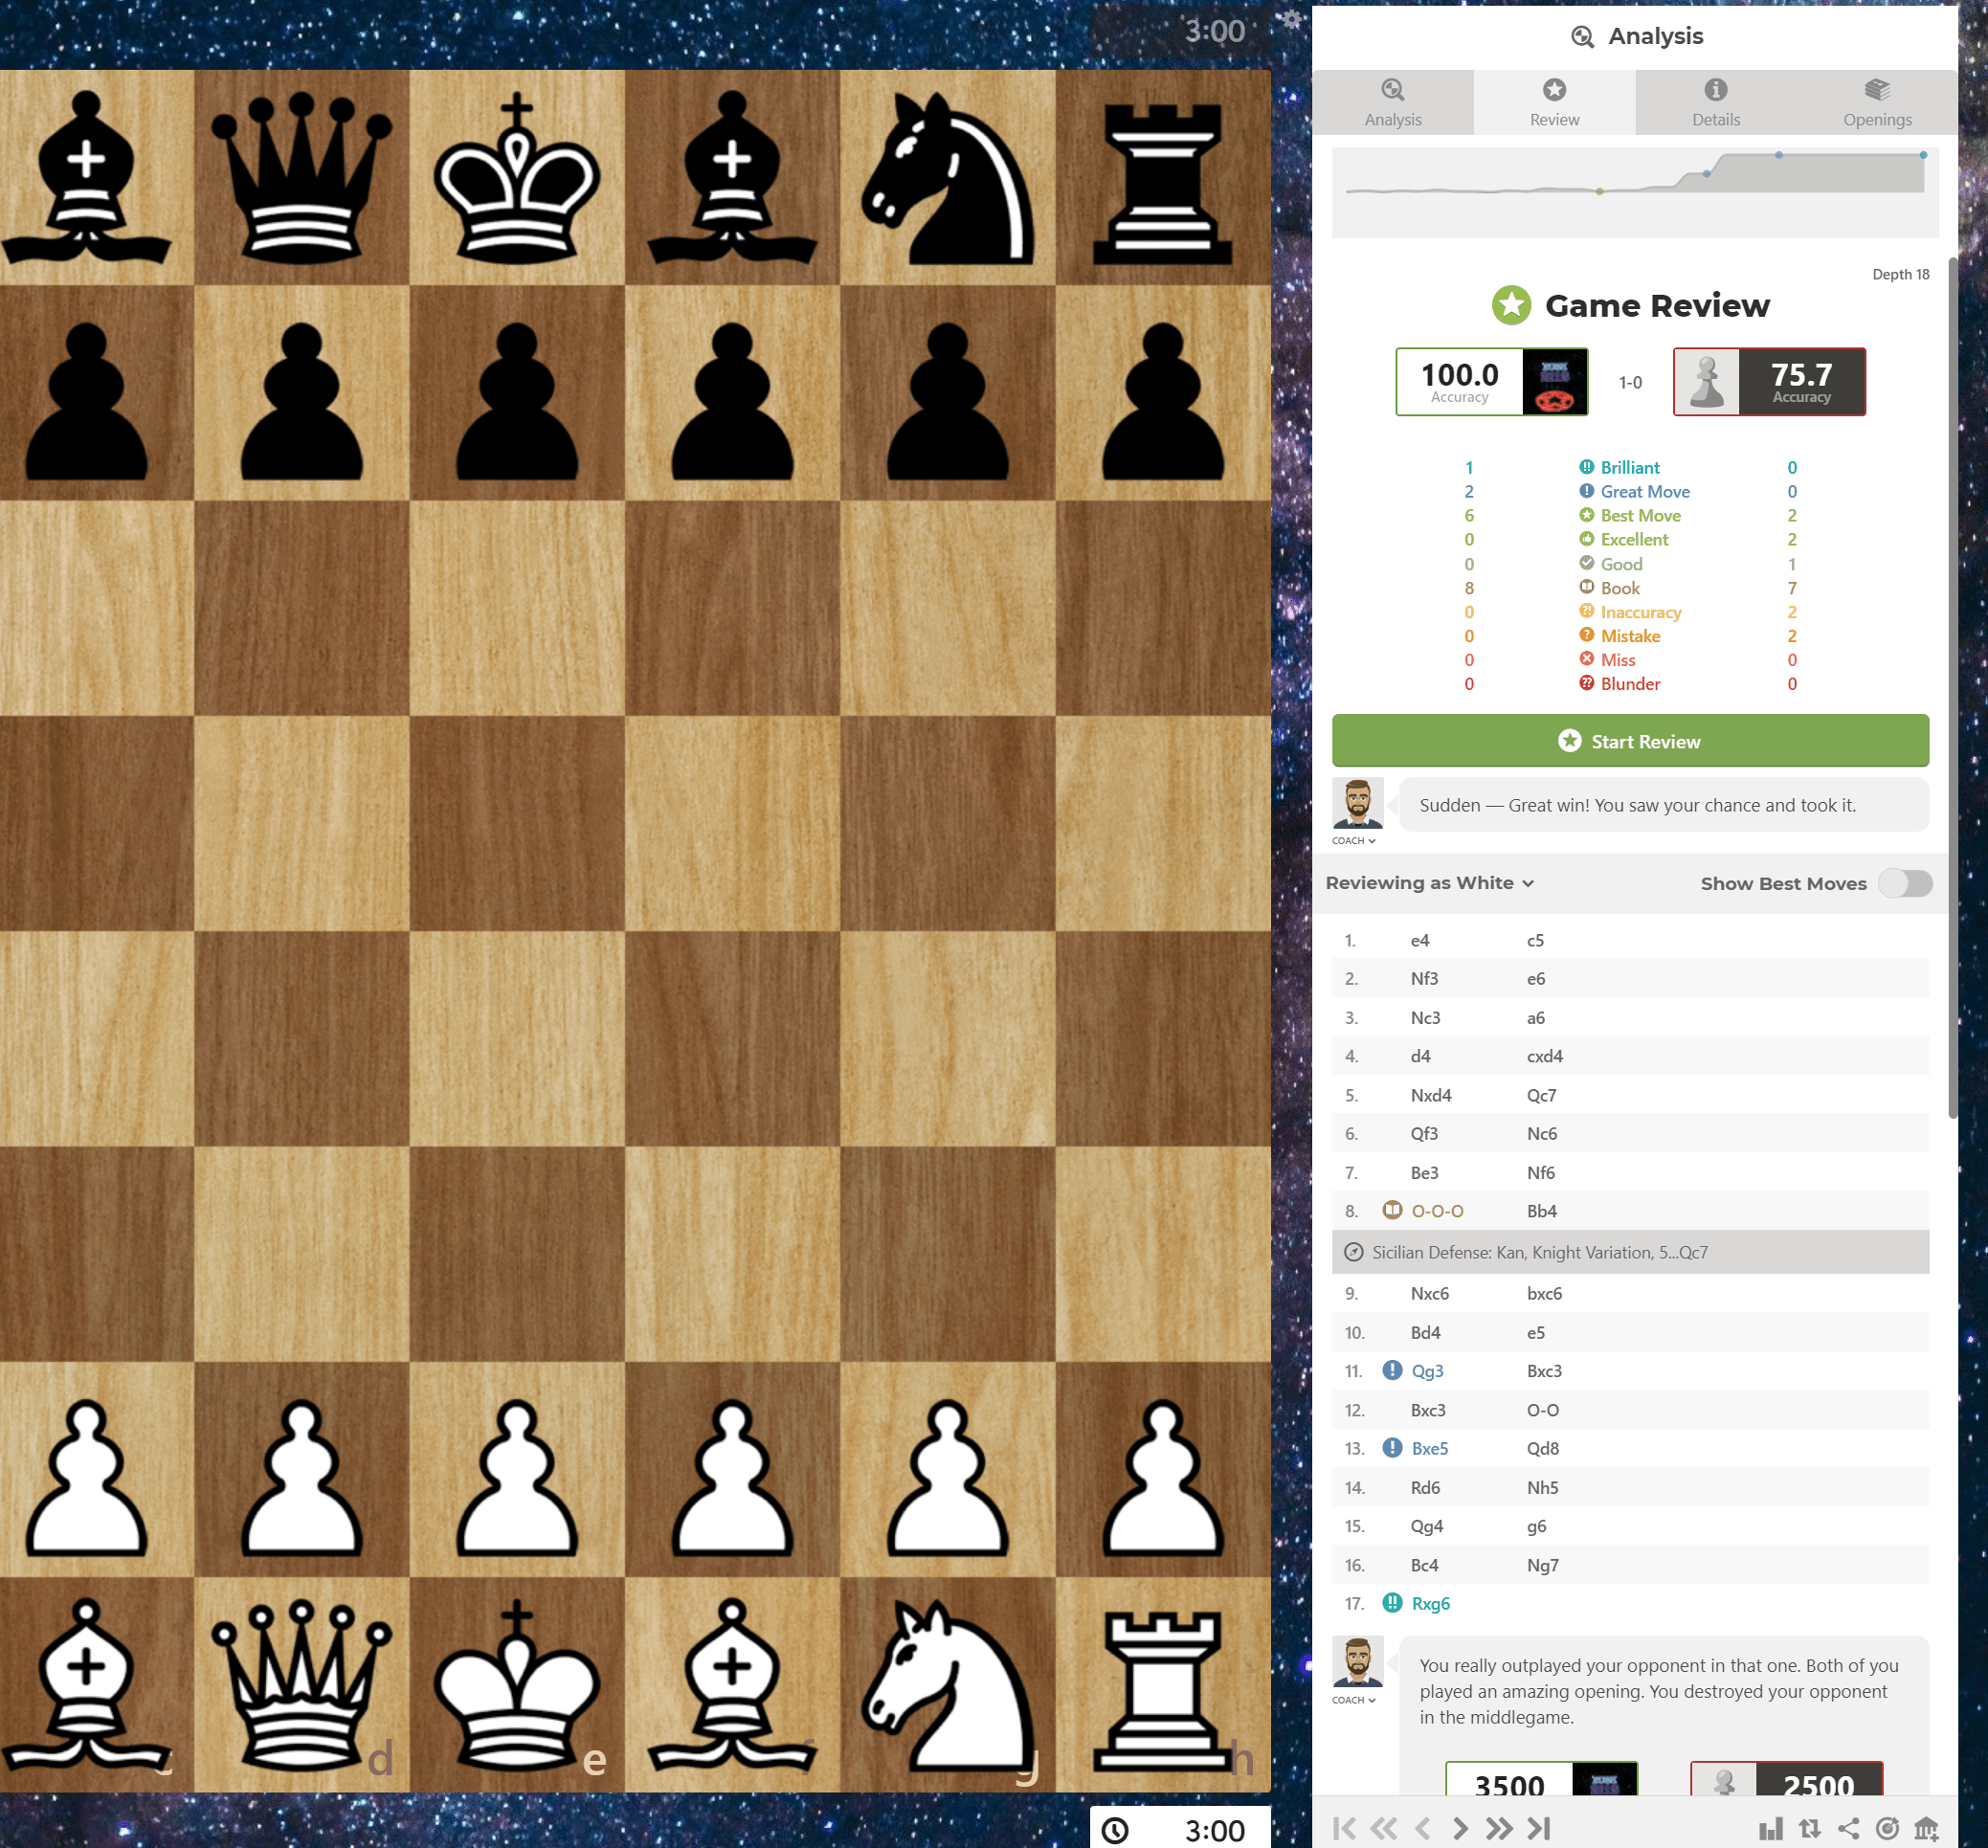 Playing like a GOD (100% accuracy, 1 brilliant move finish